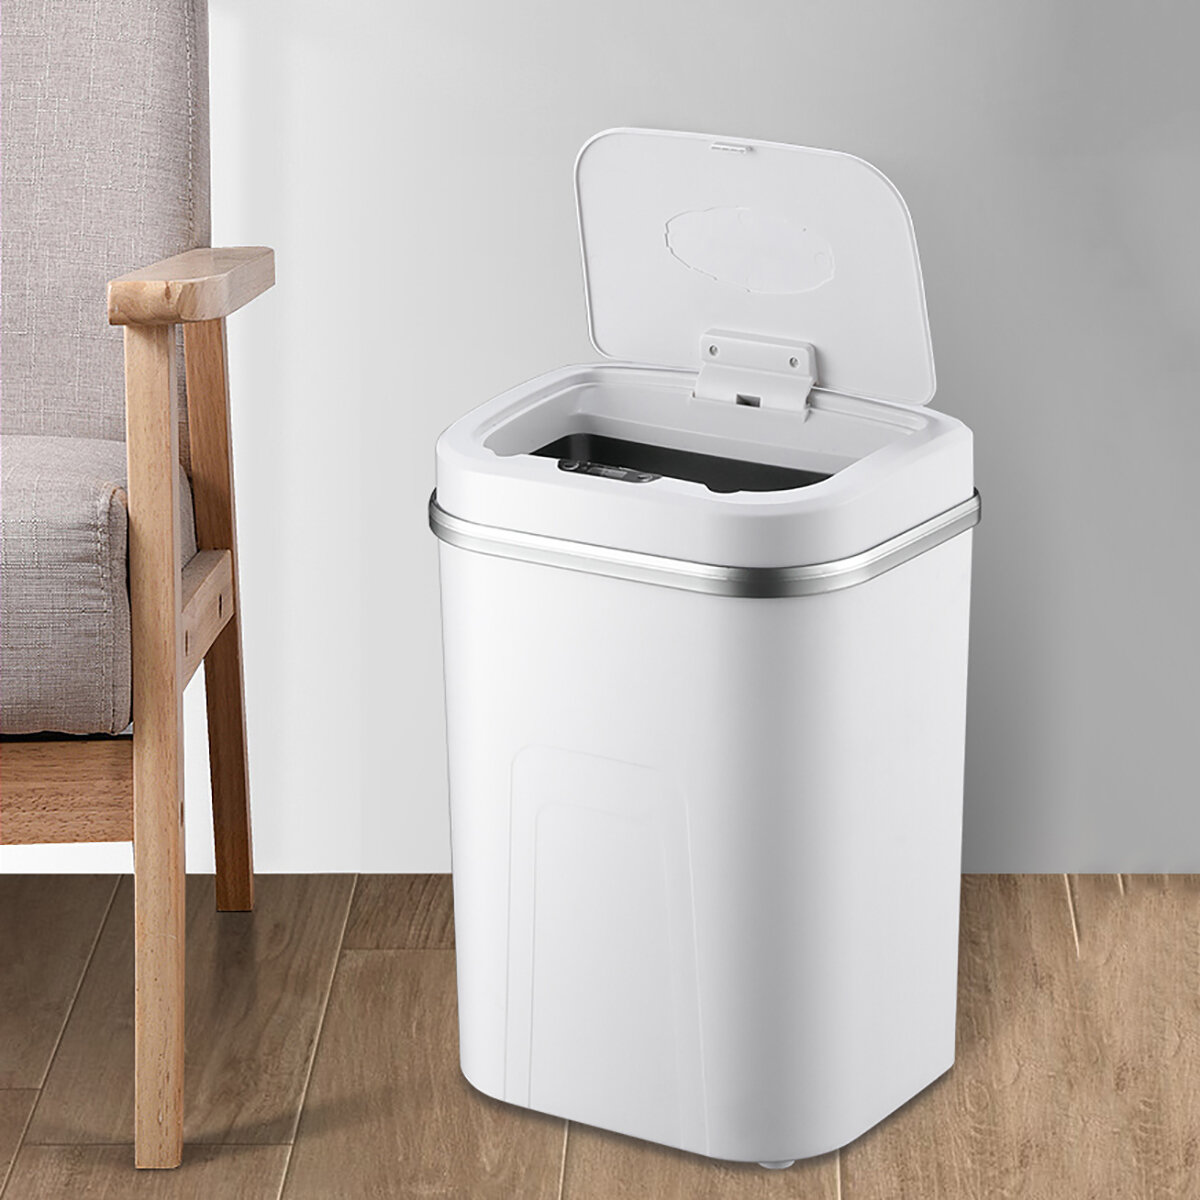 

Bakeey 15L Smart Trash Can Touchless Infrared Motion Trash Can 4 GalLarge Capacity Automatic Induction Garbage Bin